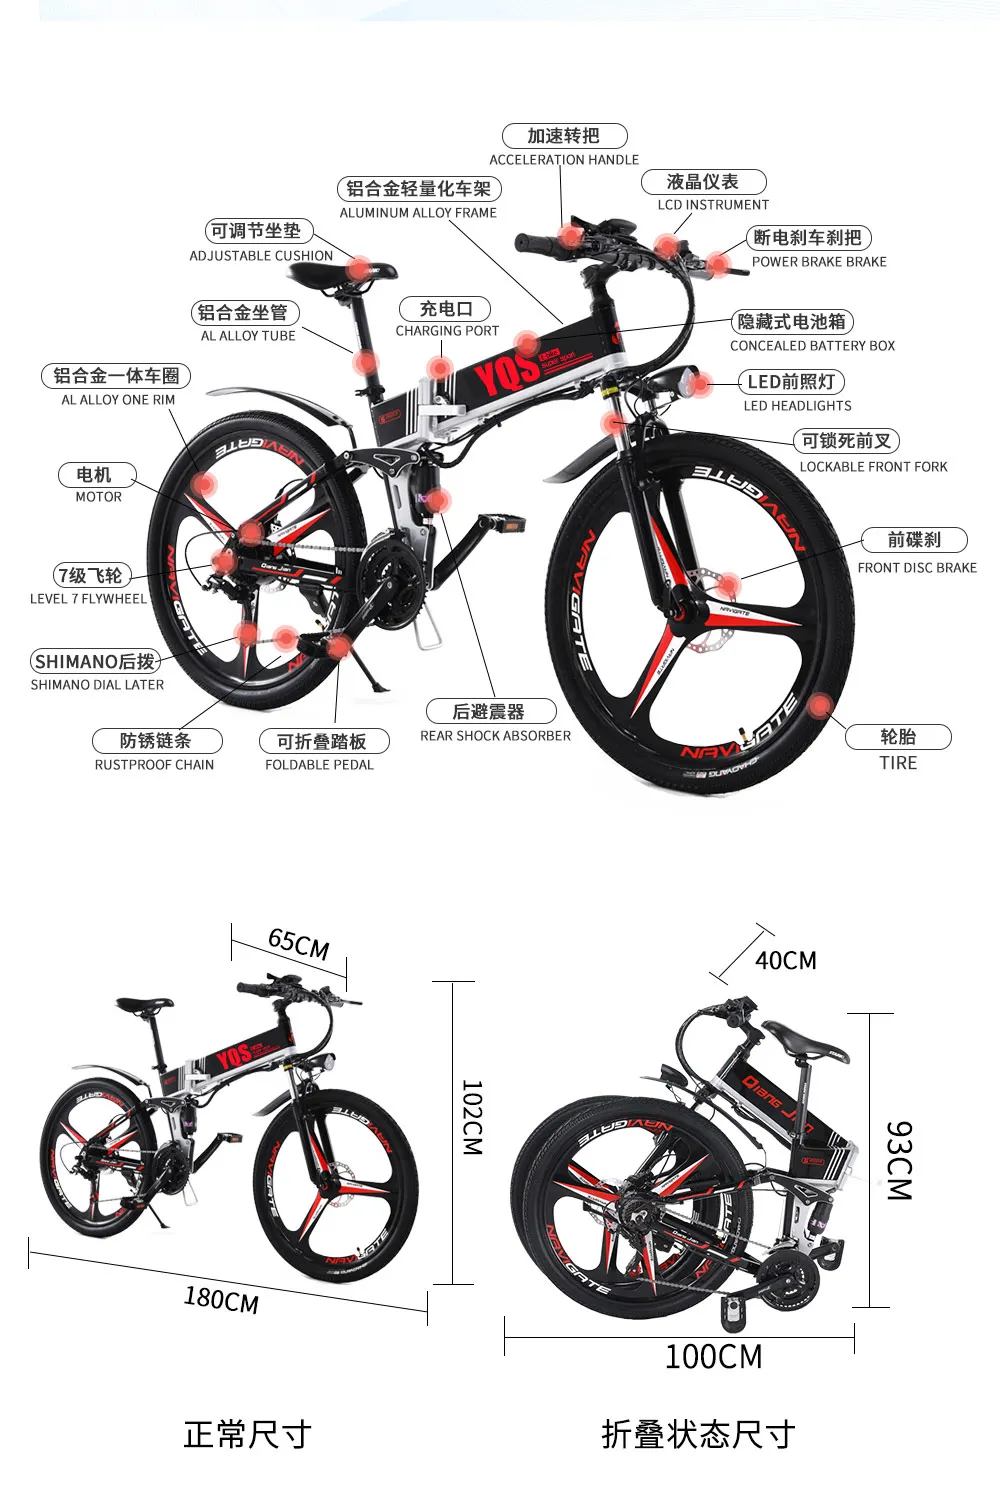 Excellent YQS Electric Bike High Speed 110KM Built-in Lithium battery ebike electric 26" Off road electric bicycle bicicleta eletric 6